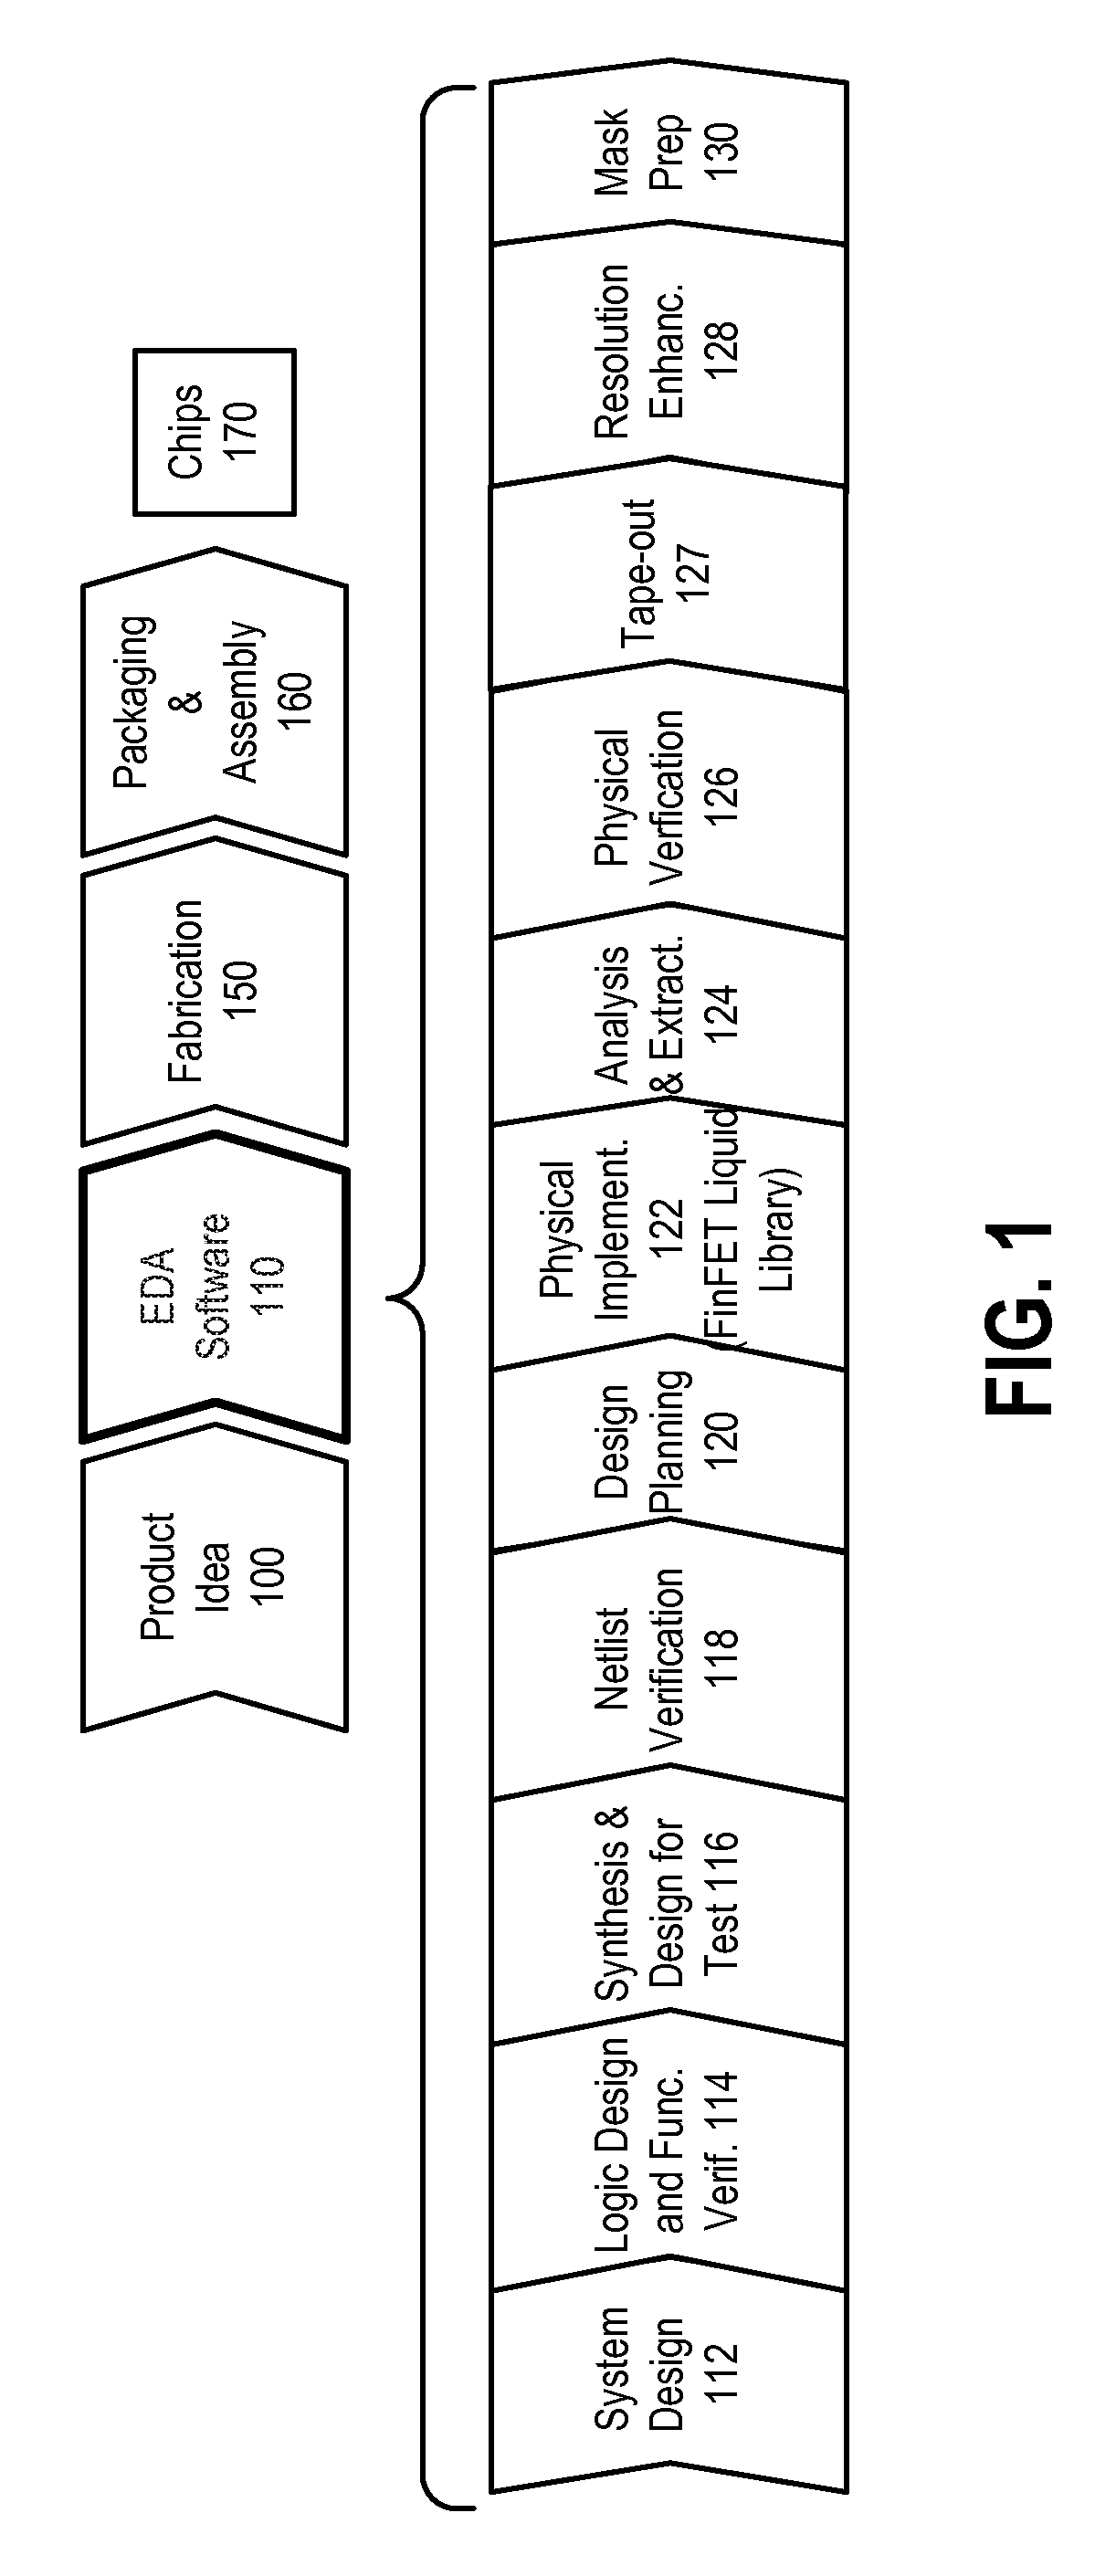 N-channel and p-channel finfet cell architecture